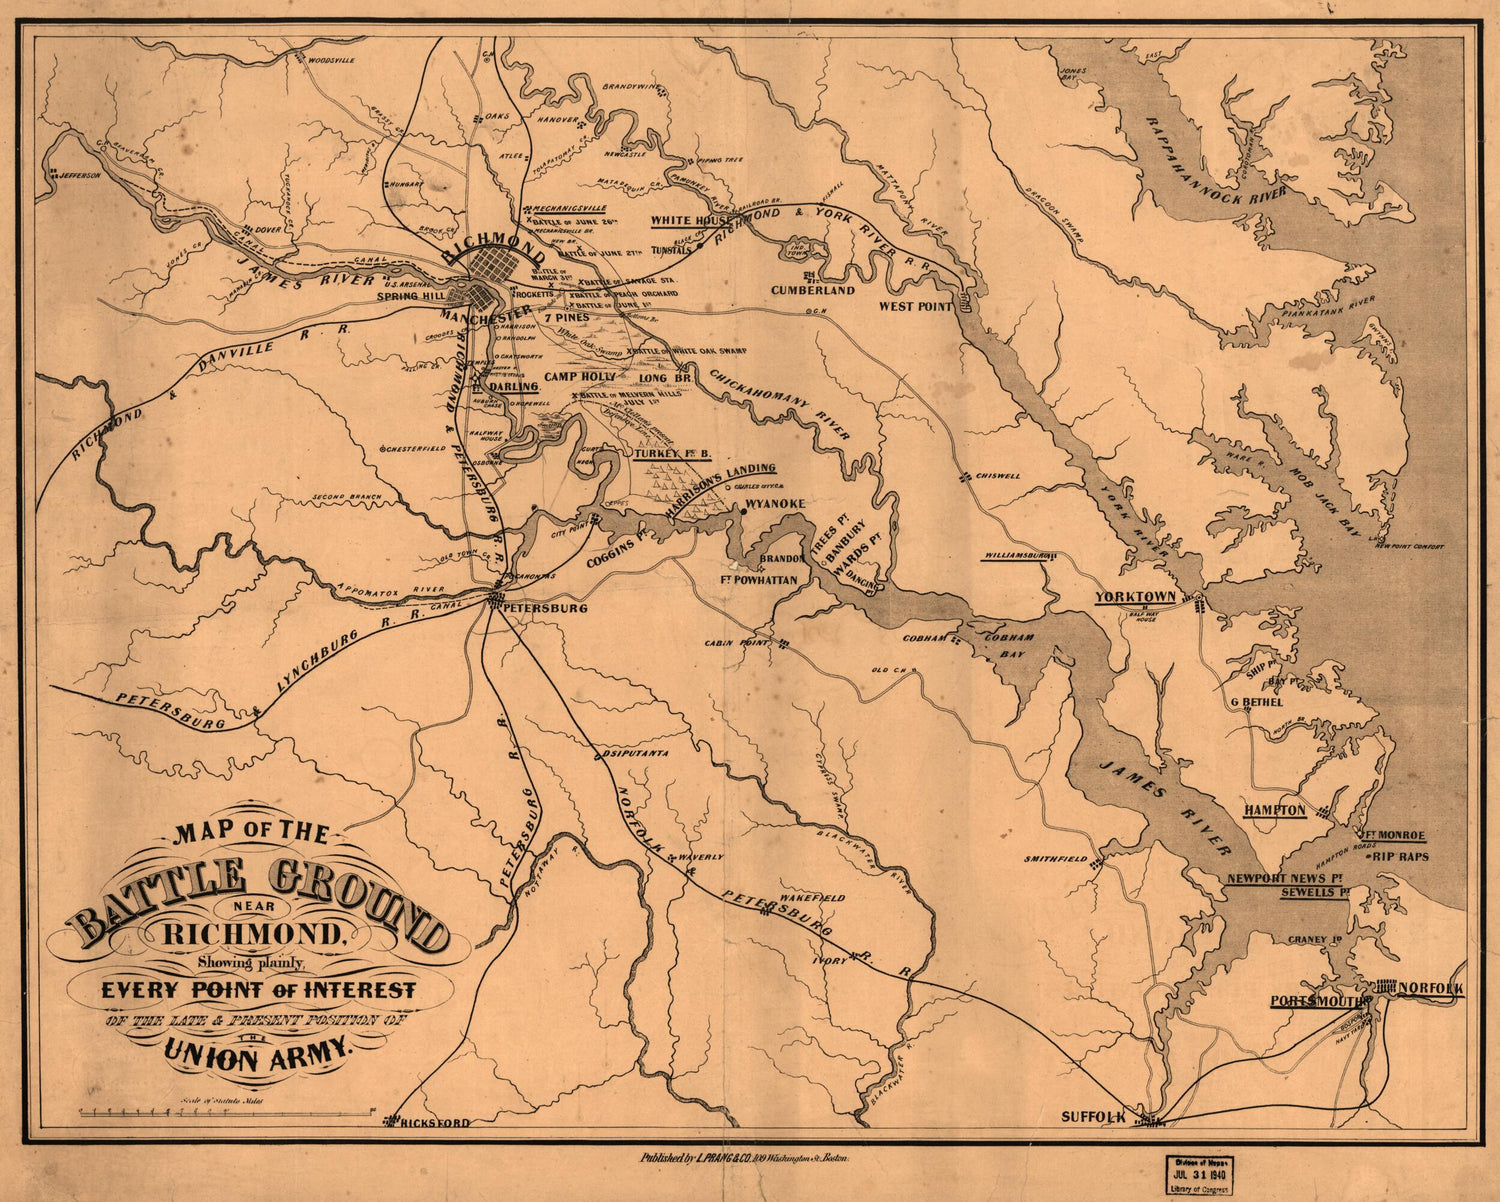 This old map of Map of the Battle Ground Near Richmond, Showing Plainly, Every Point of Interest of the Late &amp; Present Position of the Union Army from 1862 was created by  L. Prang &amp; Co in 1862